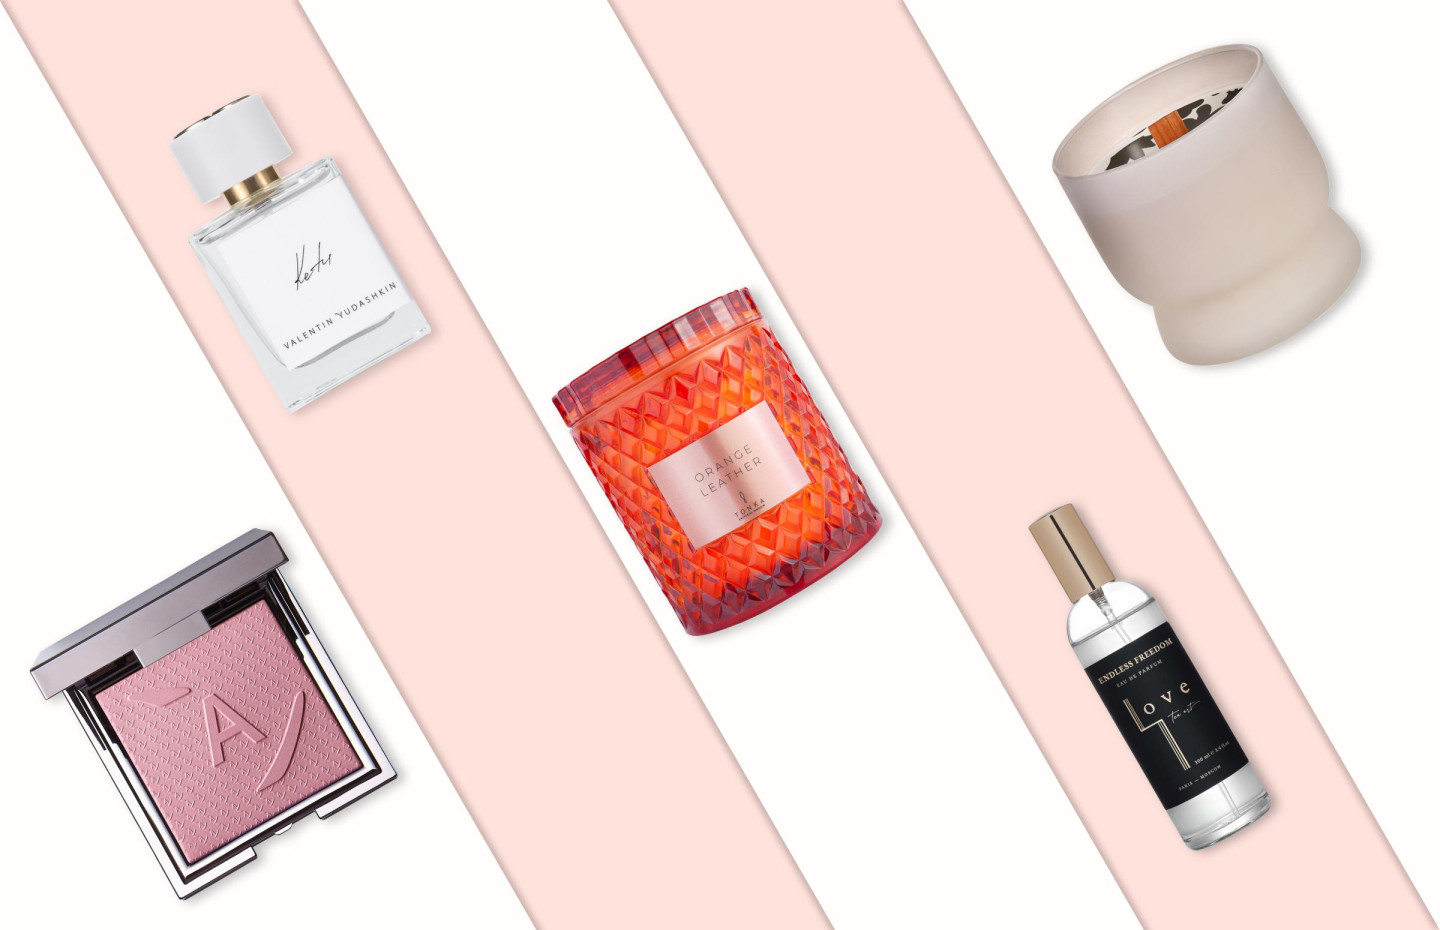 Blush, lipsticks, eye shadow palettes, fragrances and candles: beauty news of the week